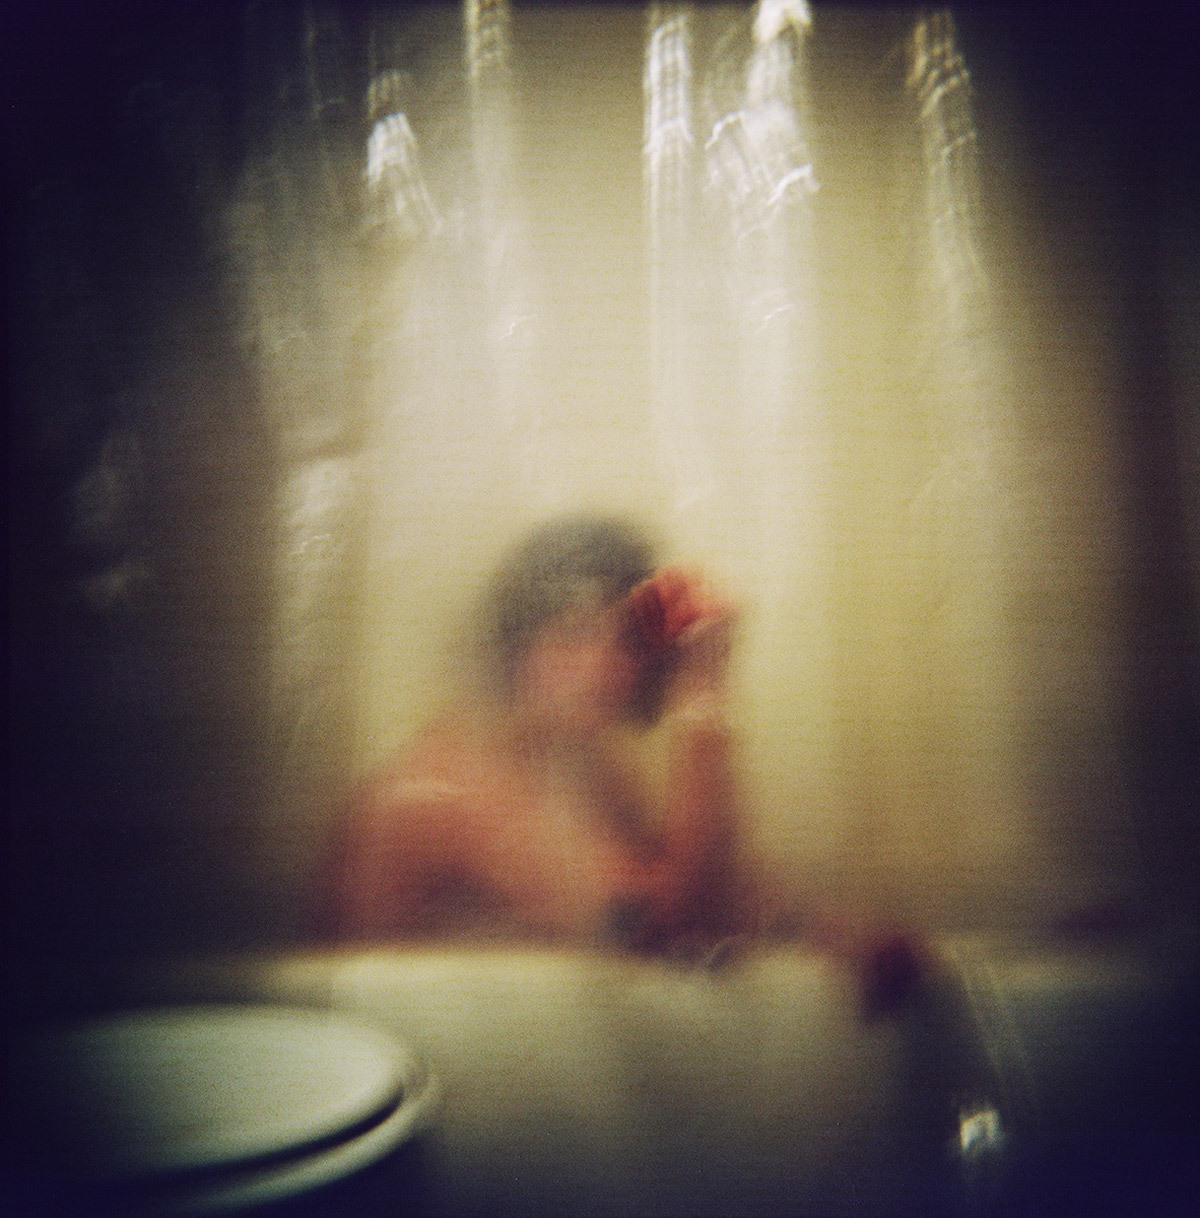 Blurry color photographic image of a figure in a bathtub behind a shower curtain, edge of toilet seen.